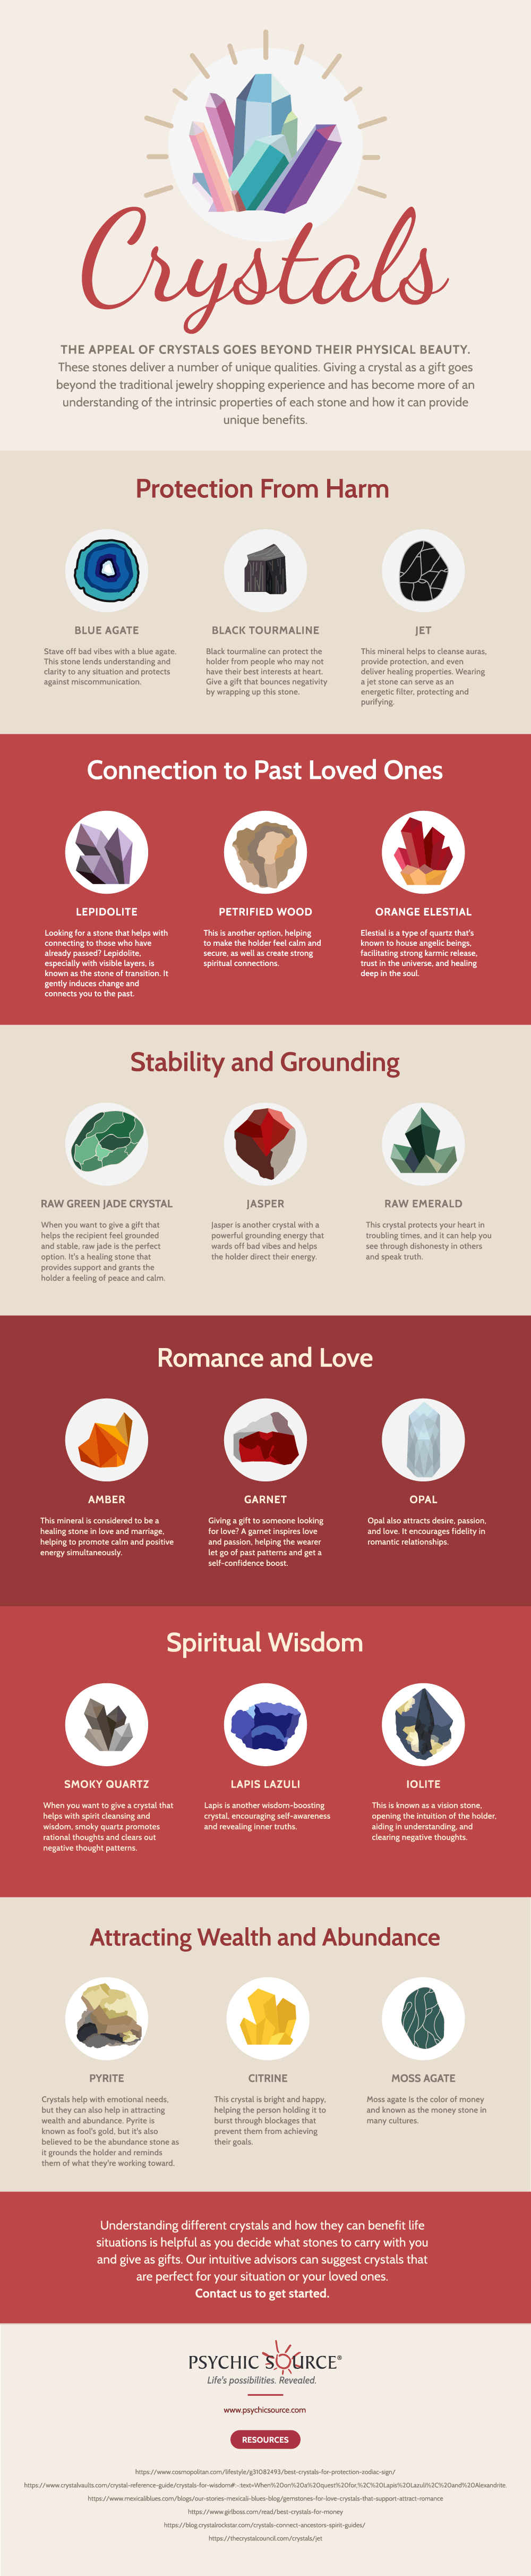 Common Crystals and Their Unique Benefits